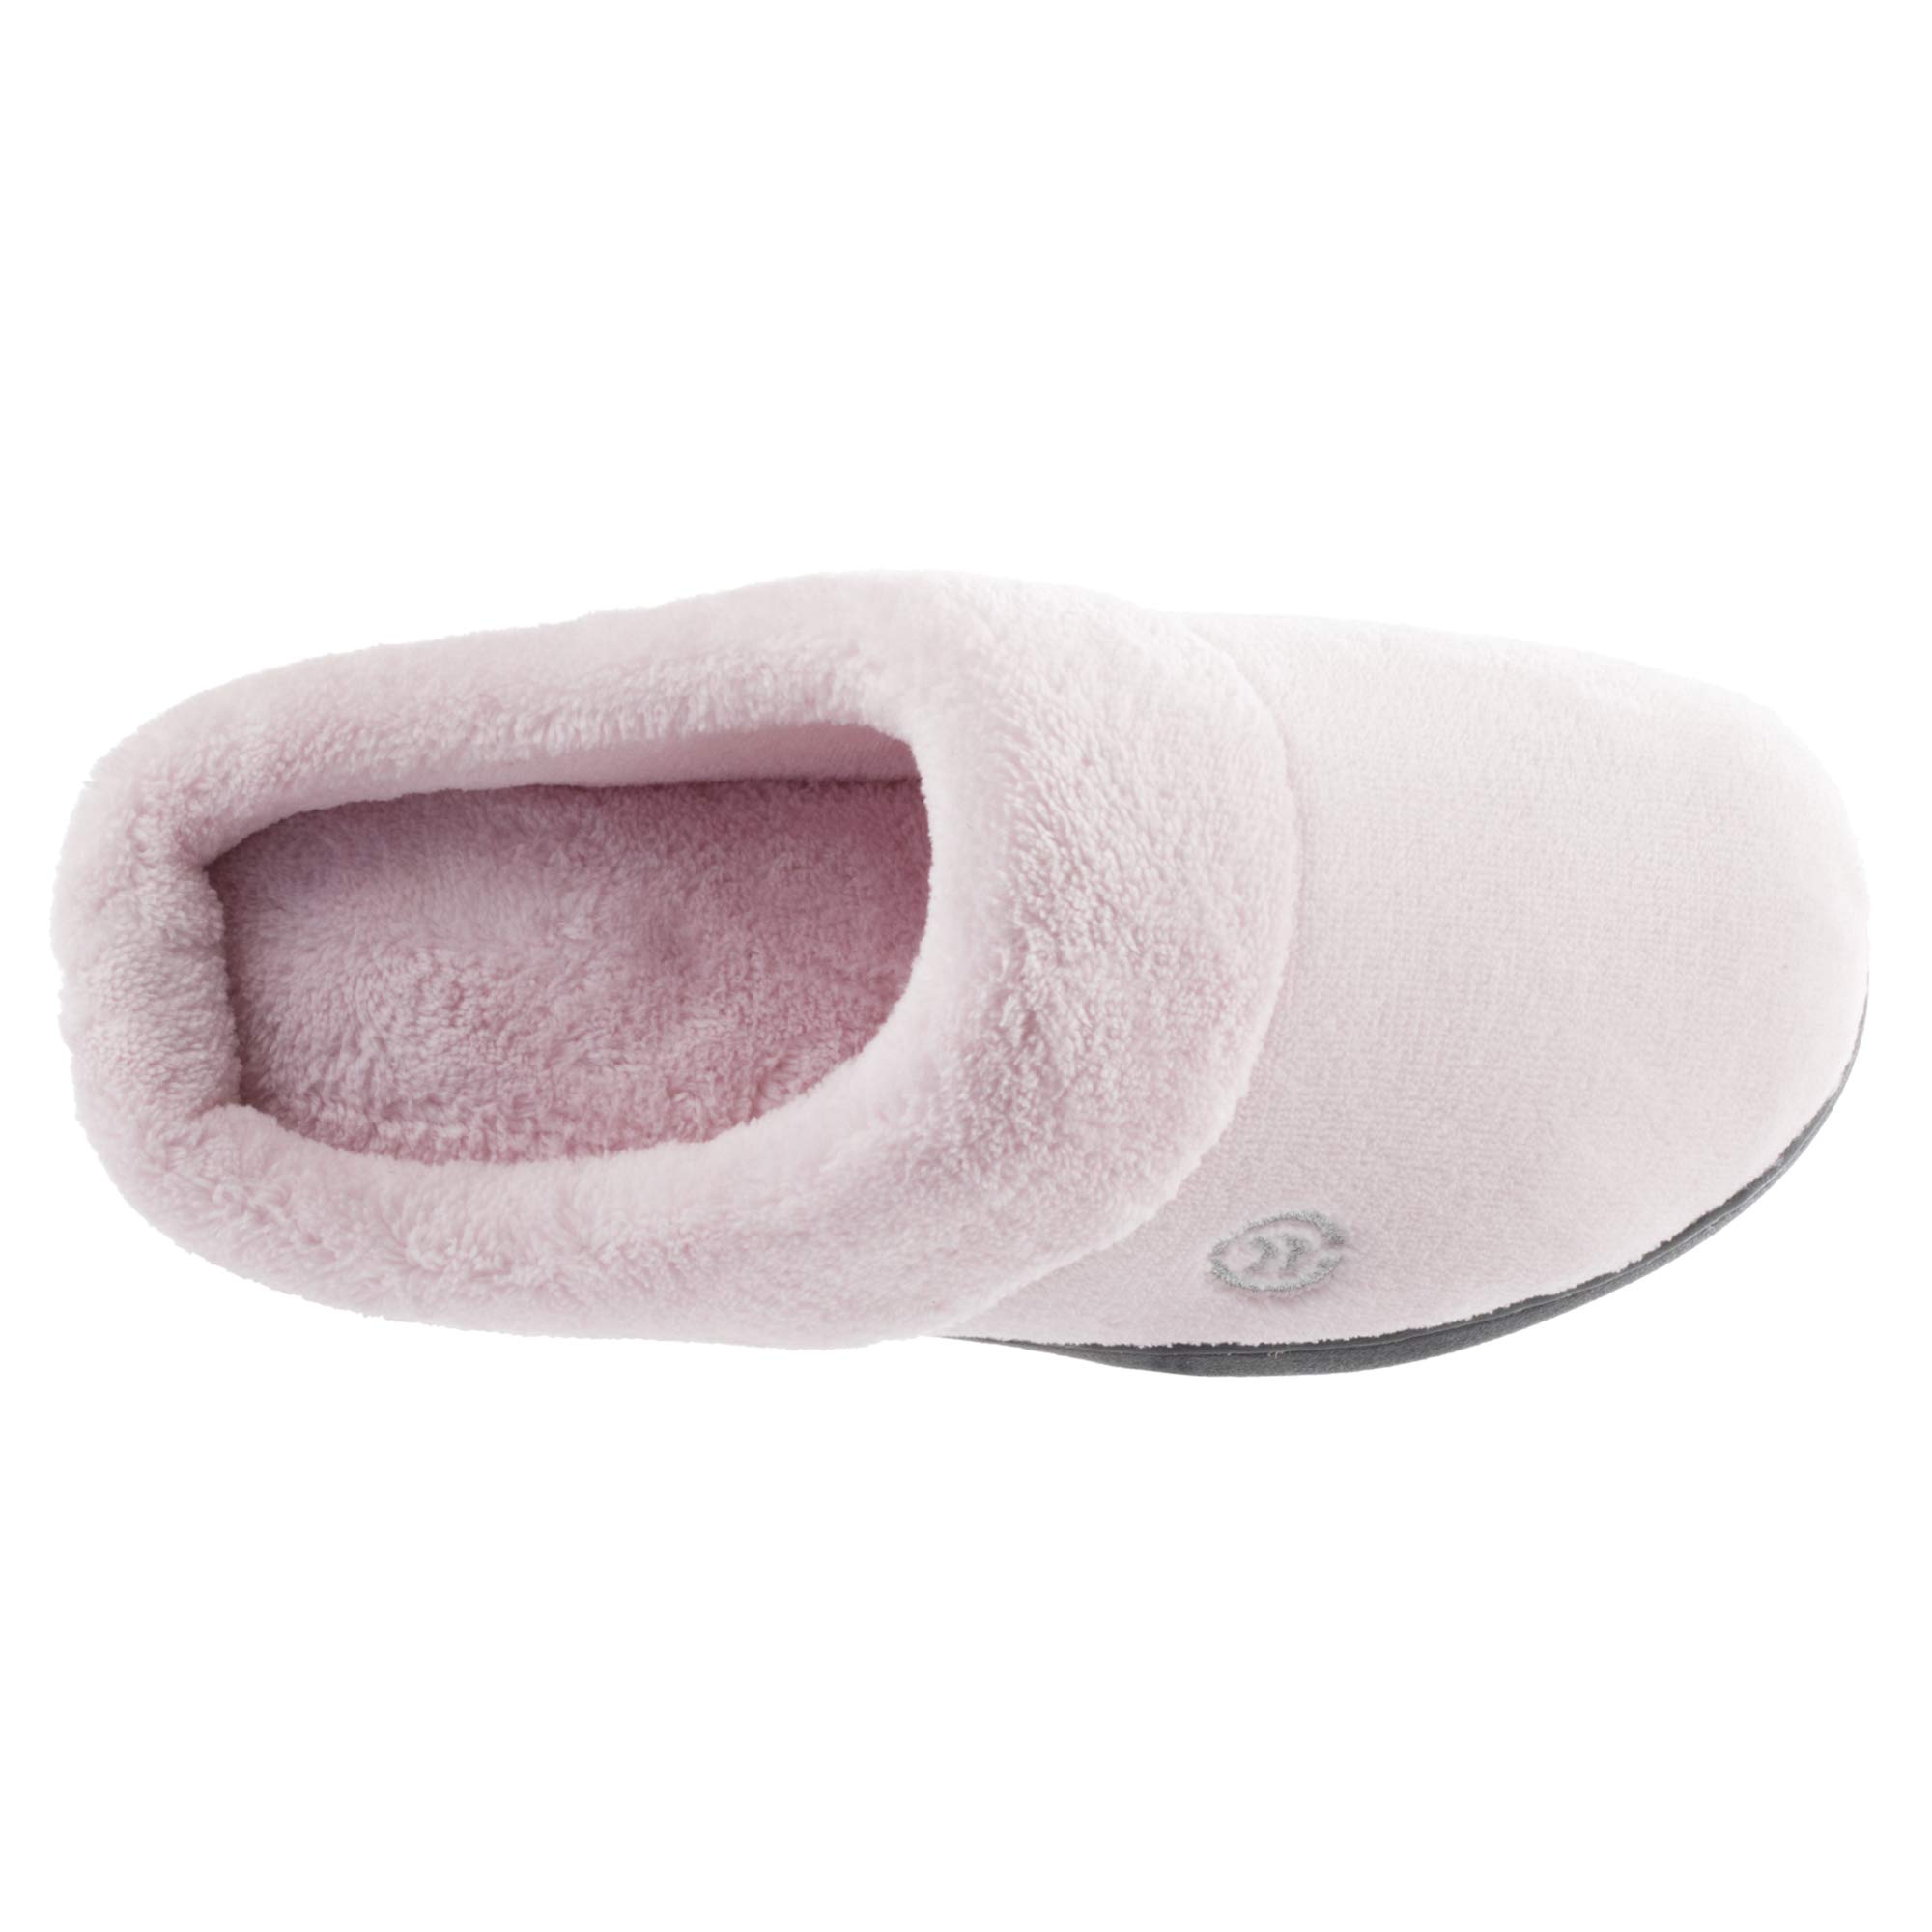 isotoner Terry Hoodback Clog Slippers for Women - Soft Memory Foam, Comfort Arch Support, House Slippers with Indoor/Outdoor Sole